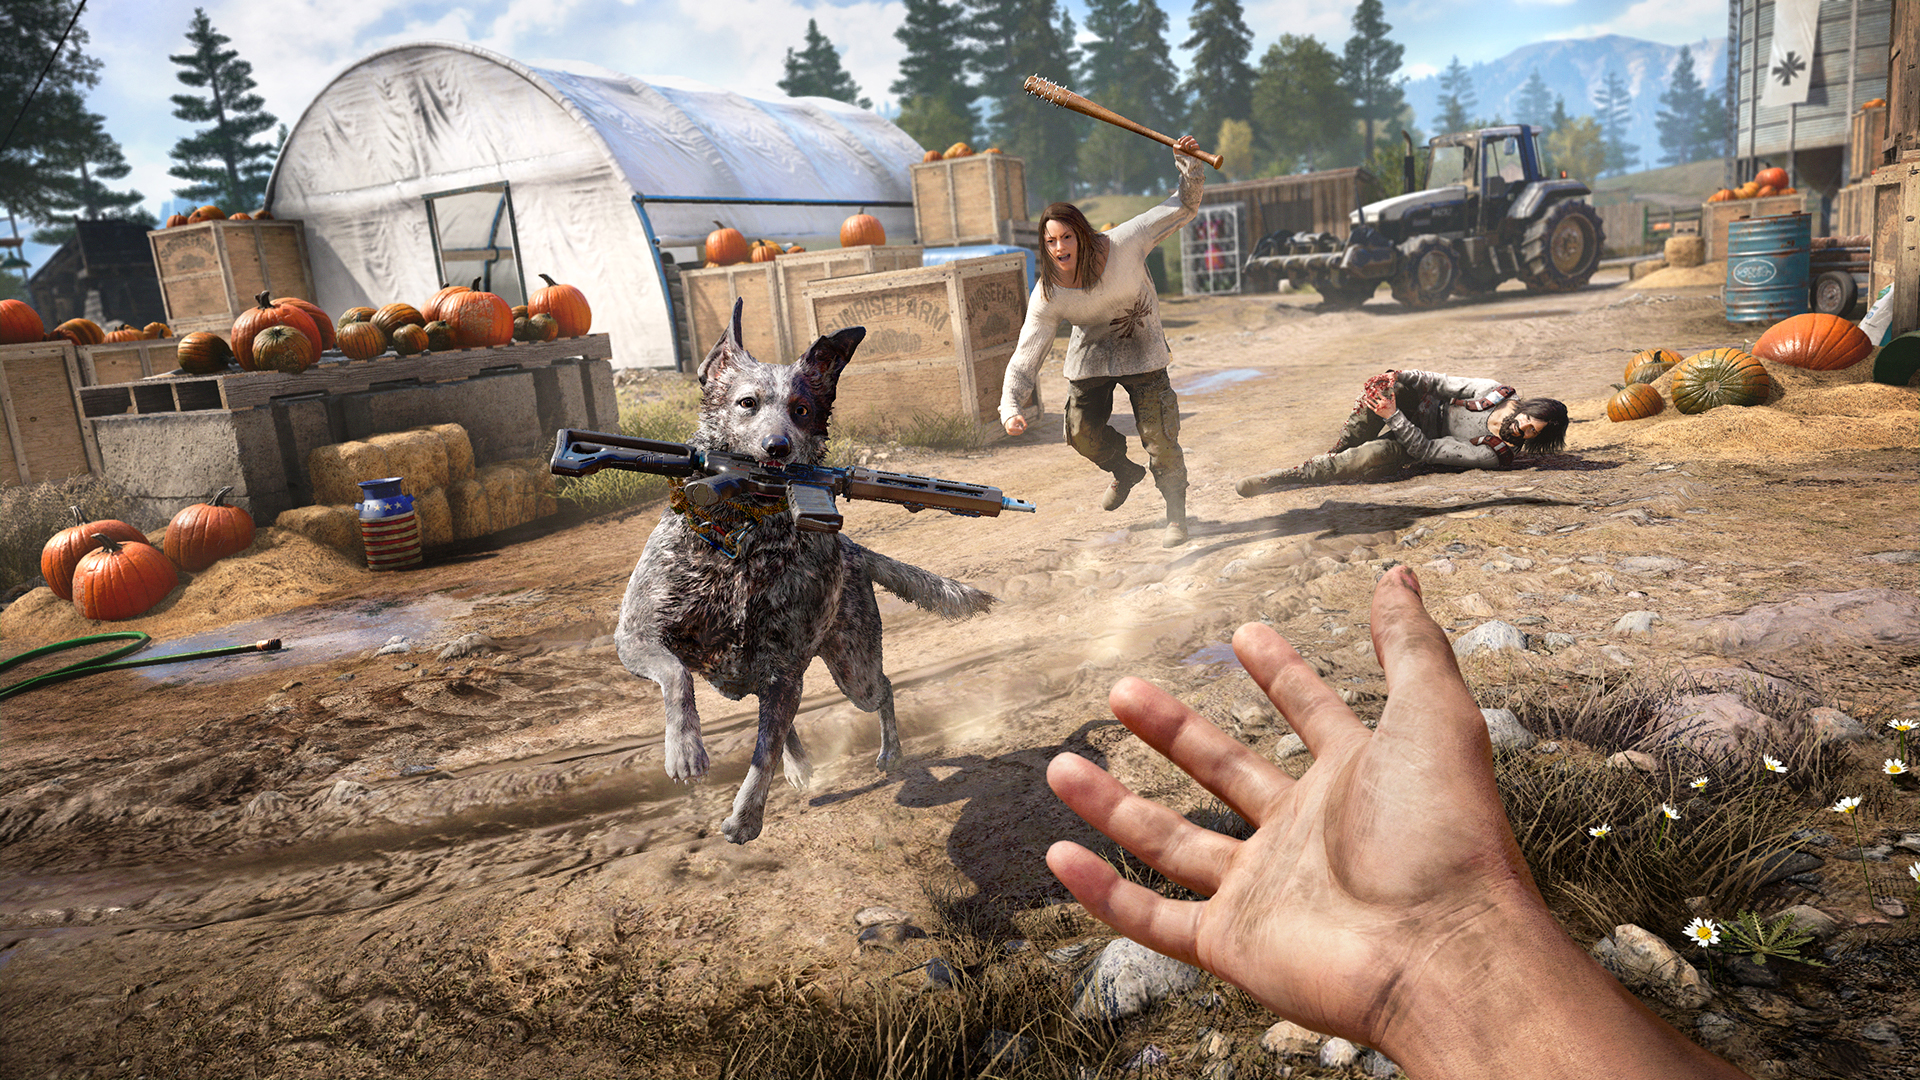 far cry 5 ps3 price